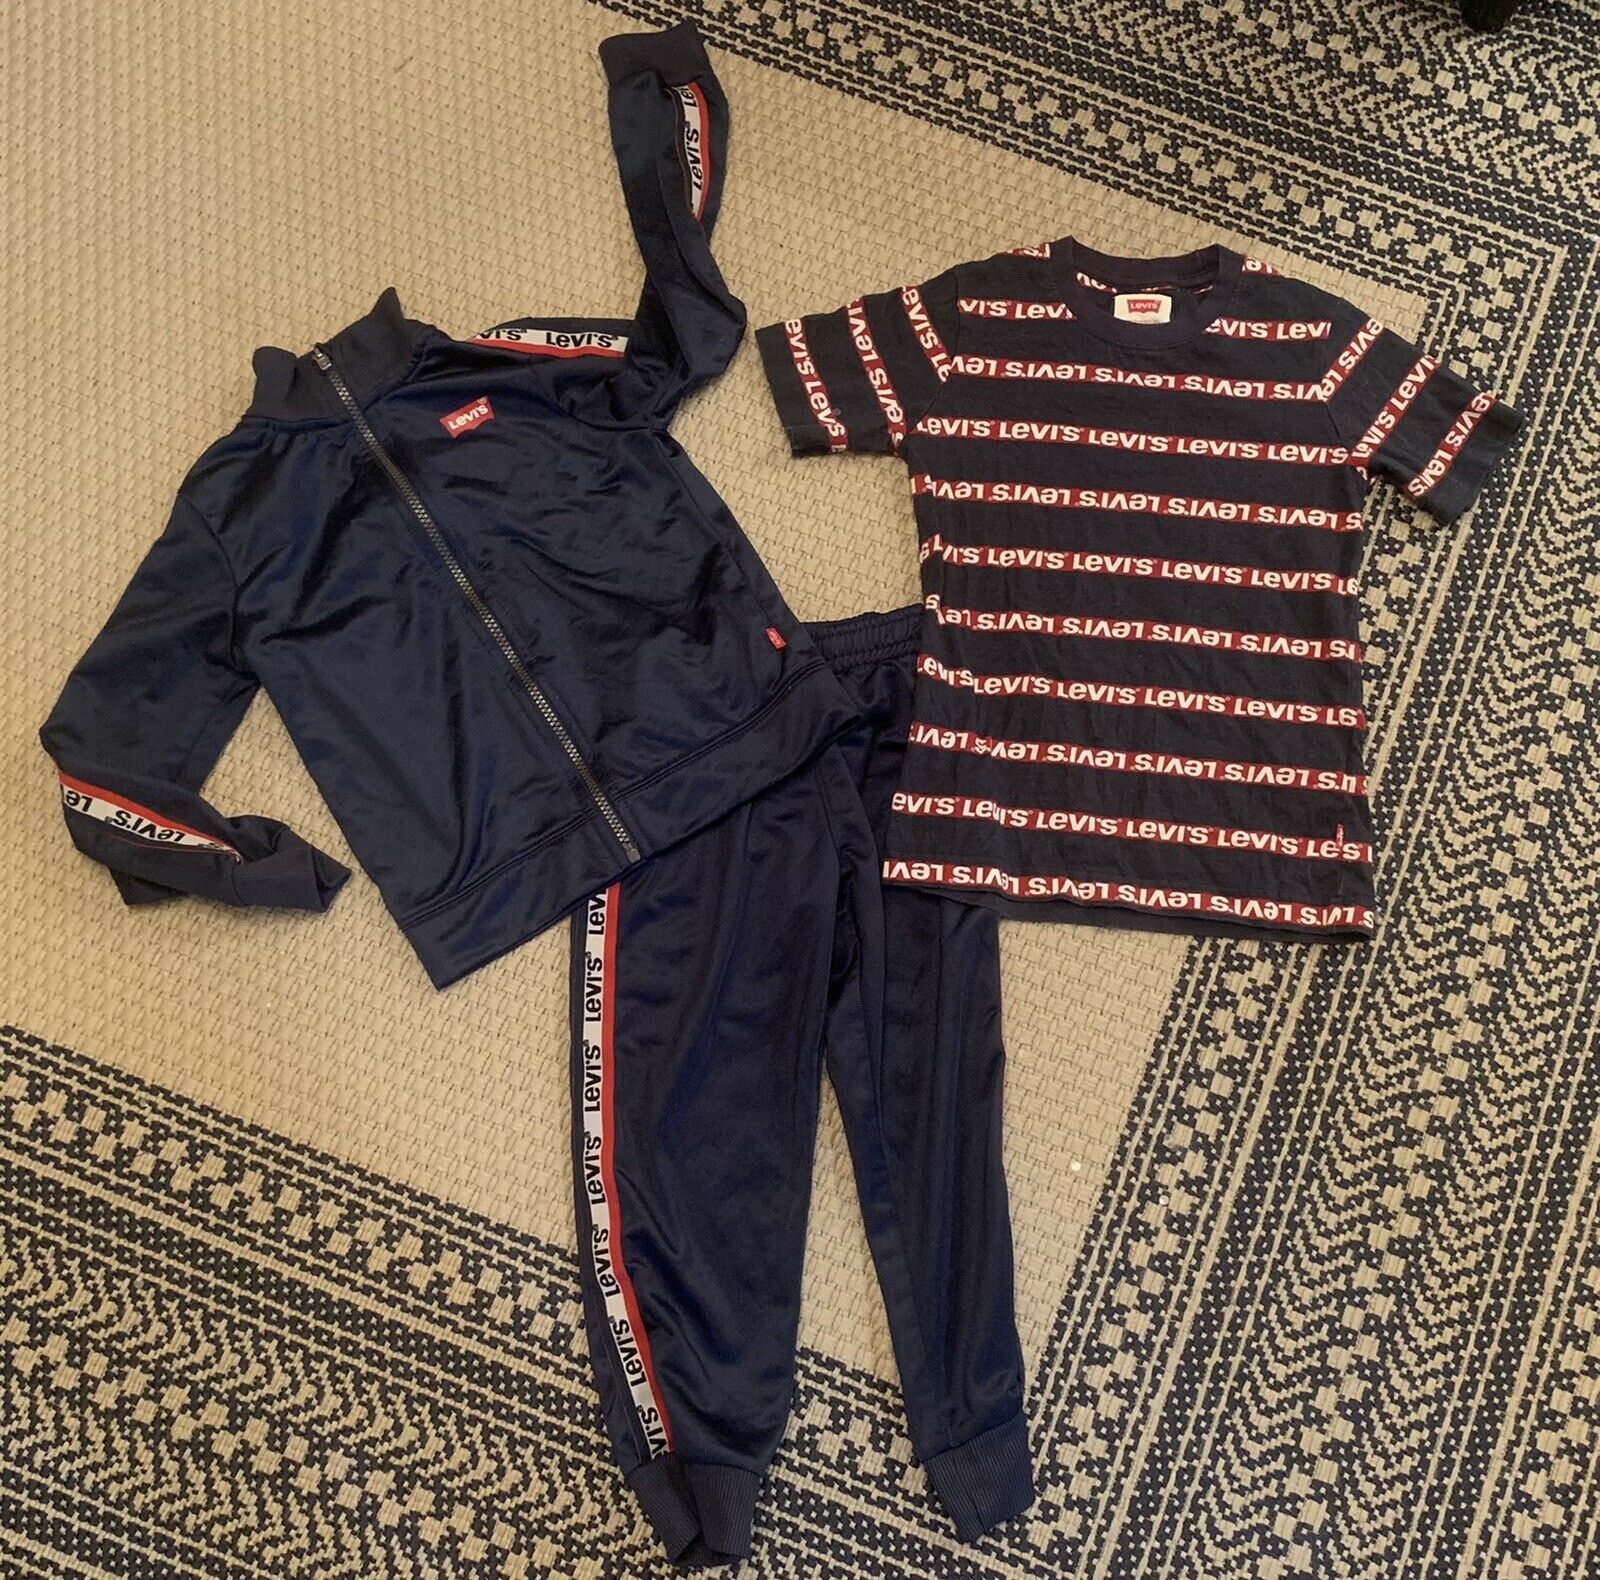 Boy’s LEVI’S Tracksuit With Tshirt Size Small 3 Pieces Navy - $29.69